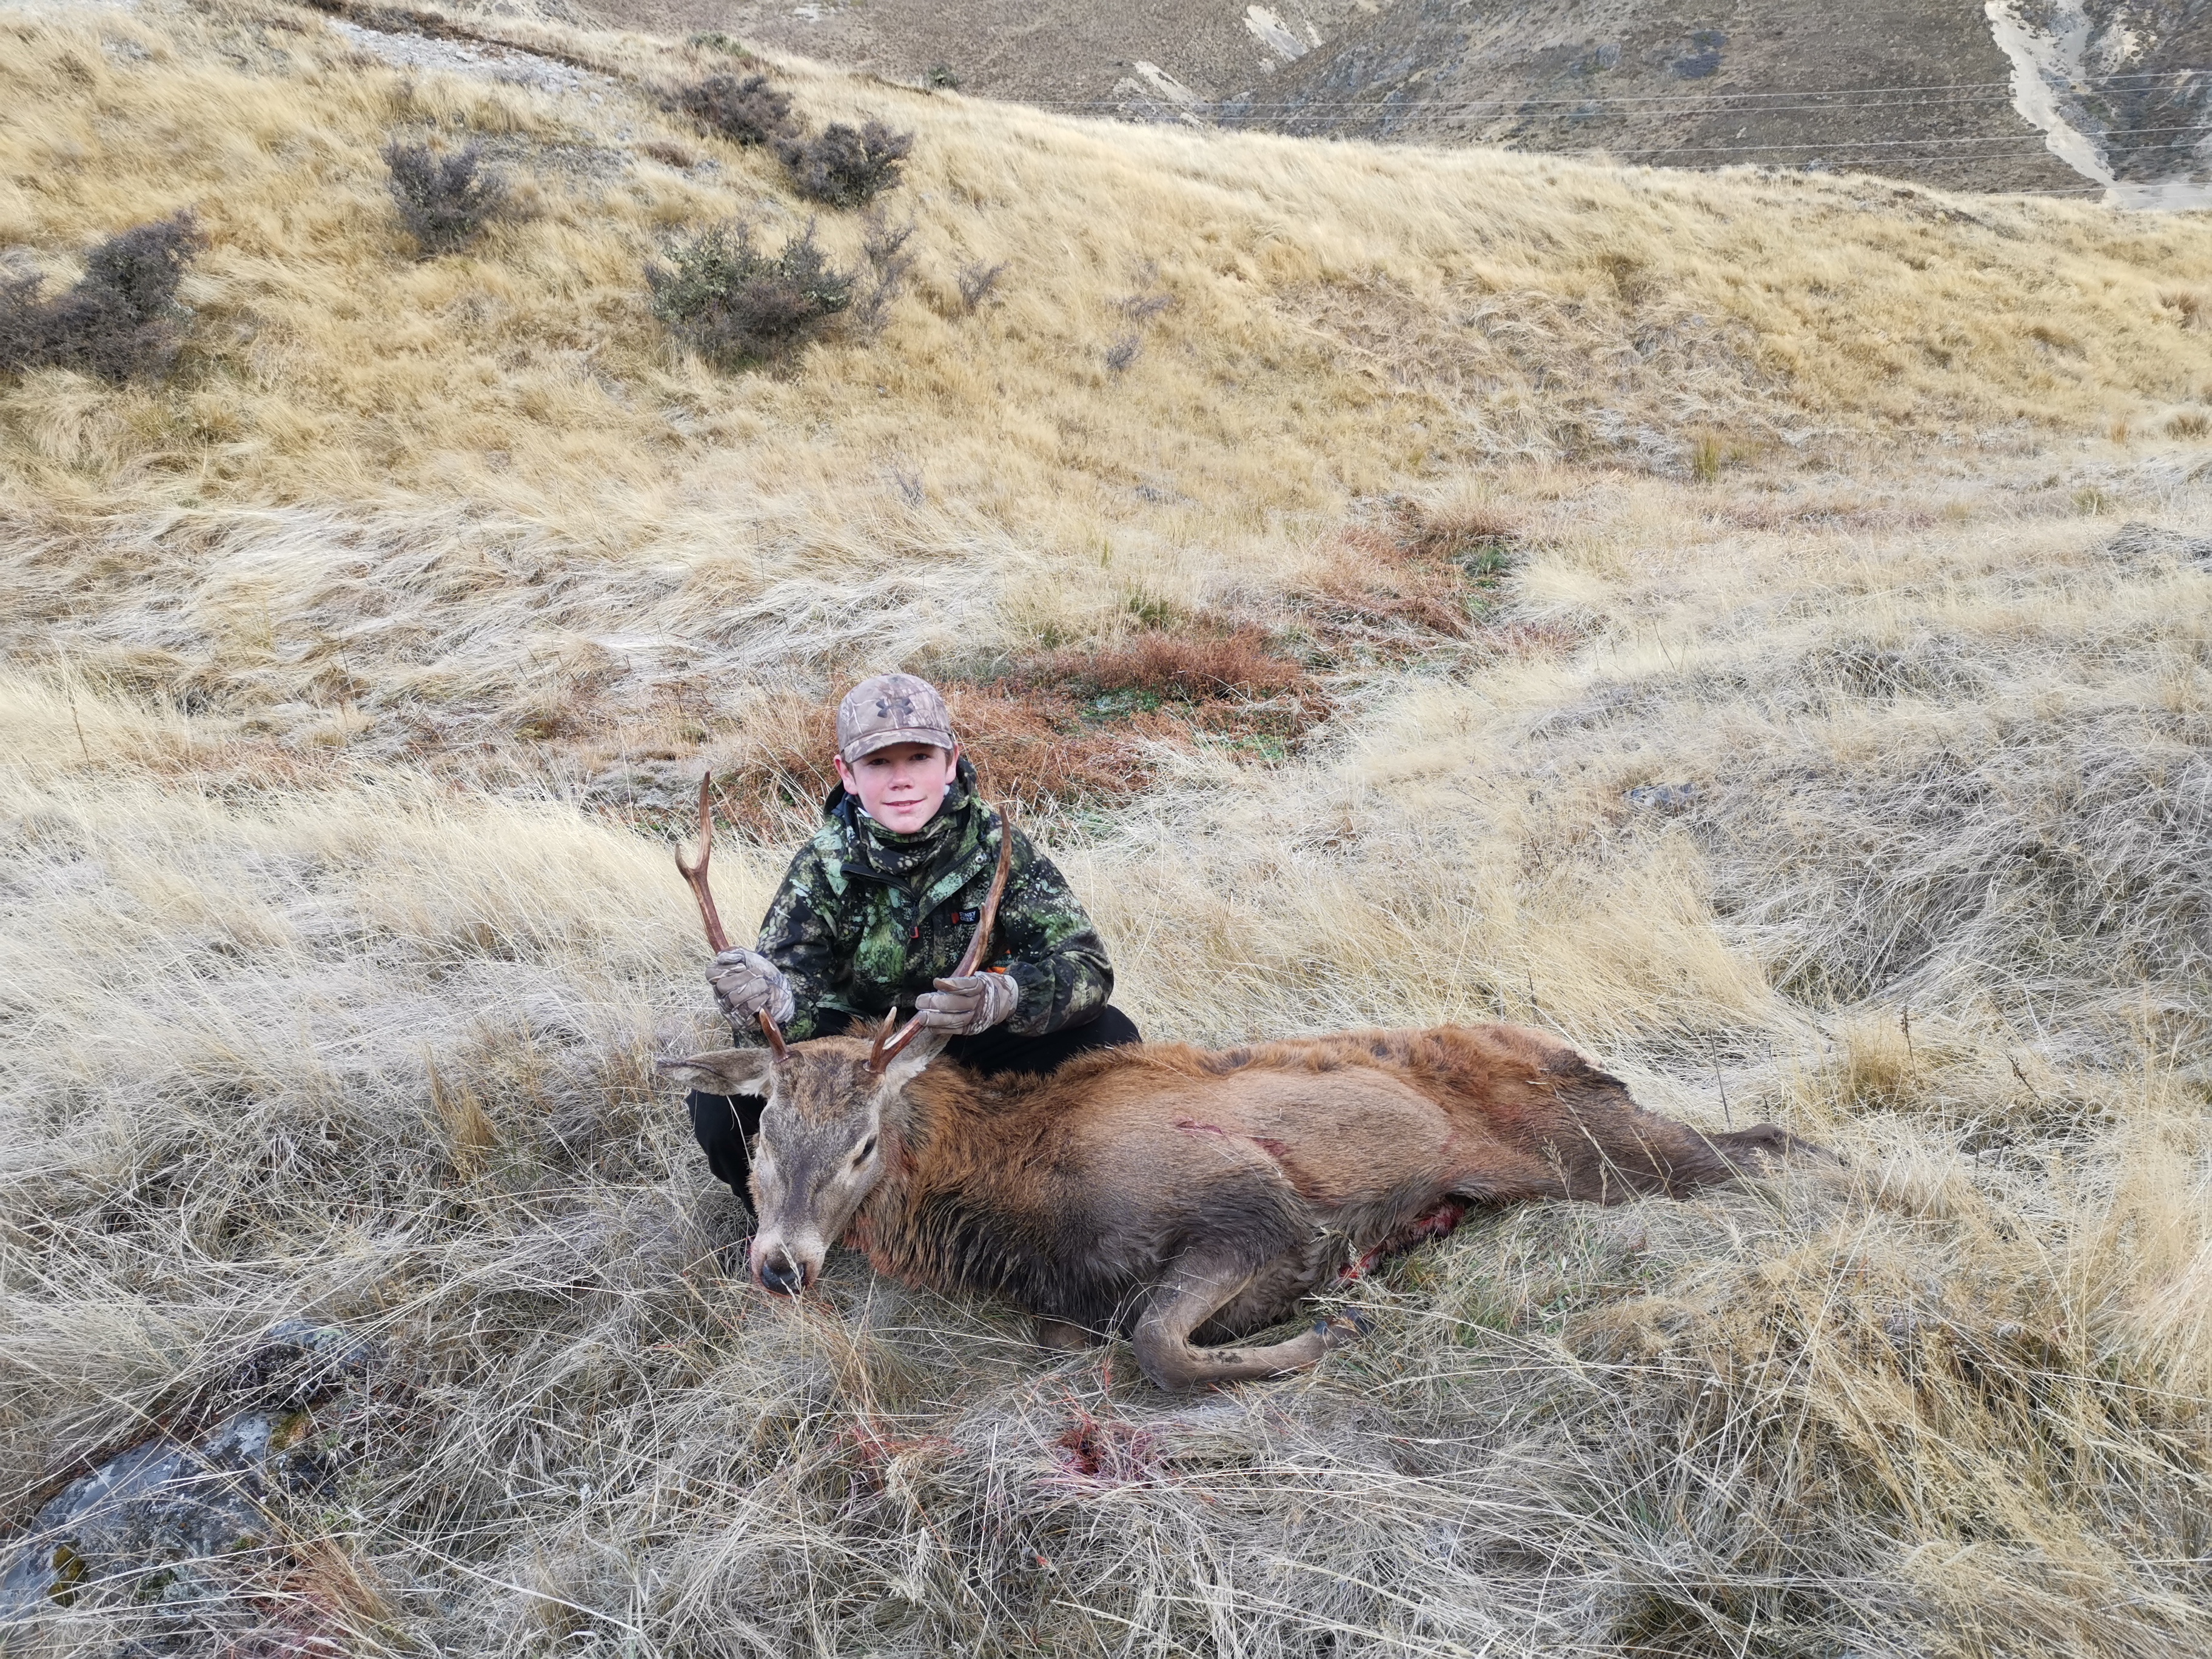 https://www.nzhuntingandshooting.co.nz/attachments/f12/140800d1590396401-2020-shot-stags-img_20200523_085204.jpg